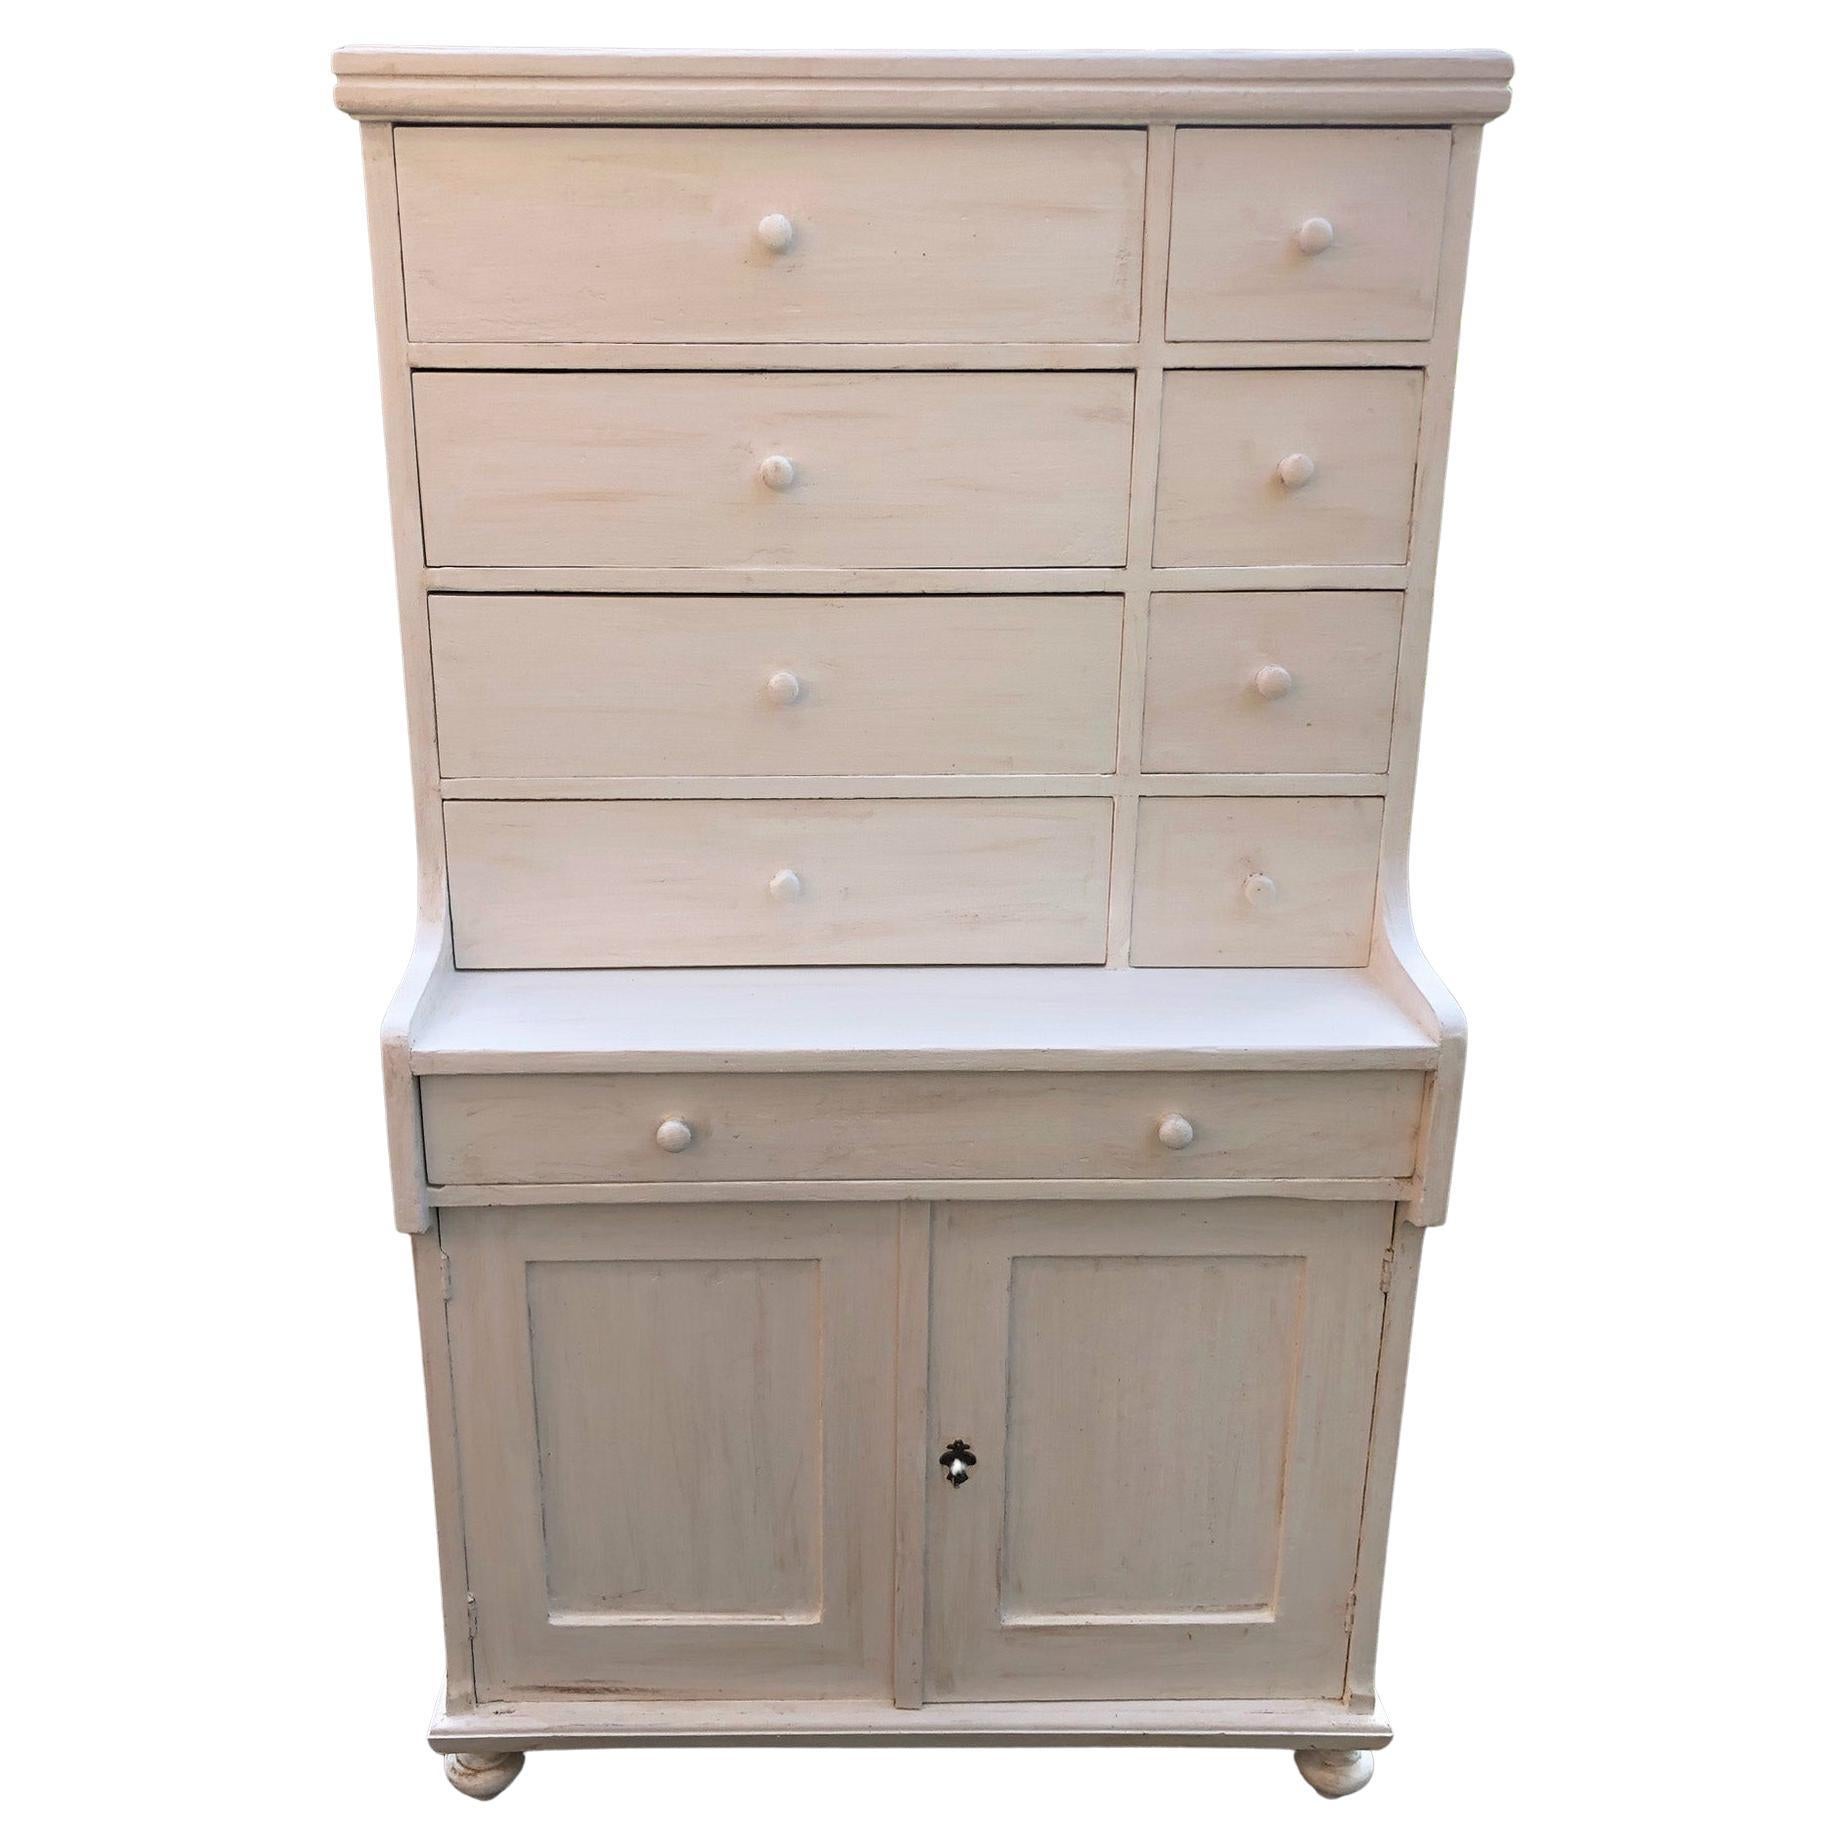 Toscana Sideboard, Antiqued White Colour, with 9 Drawers and Two Doors